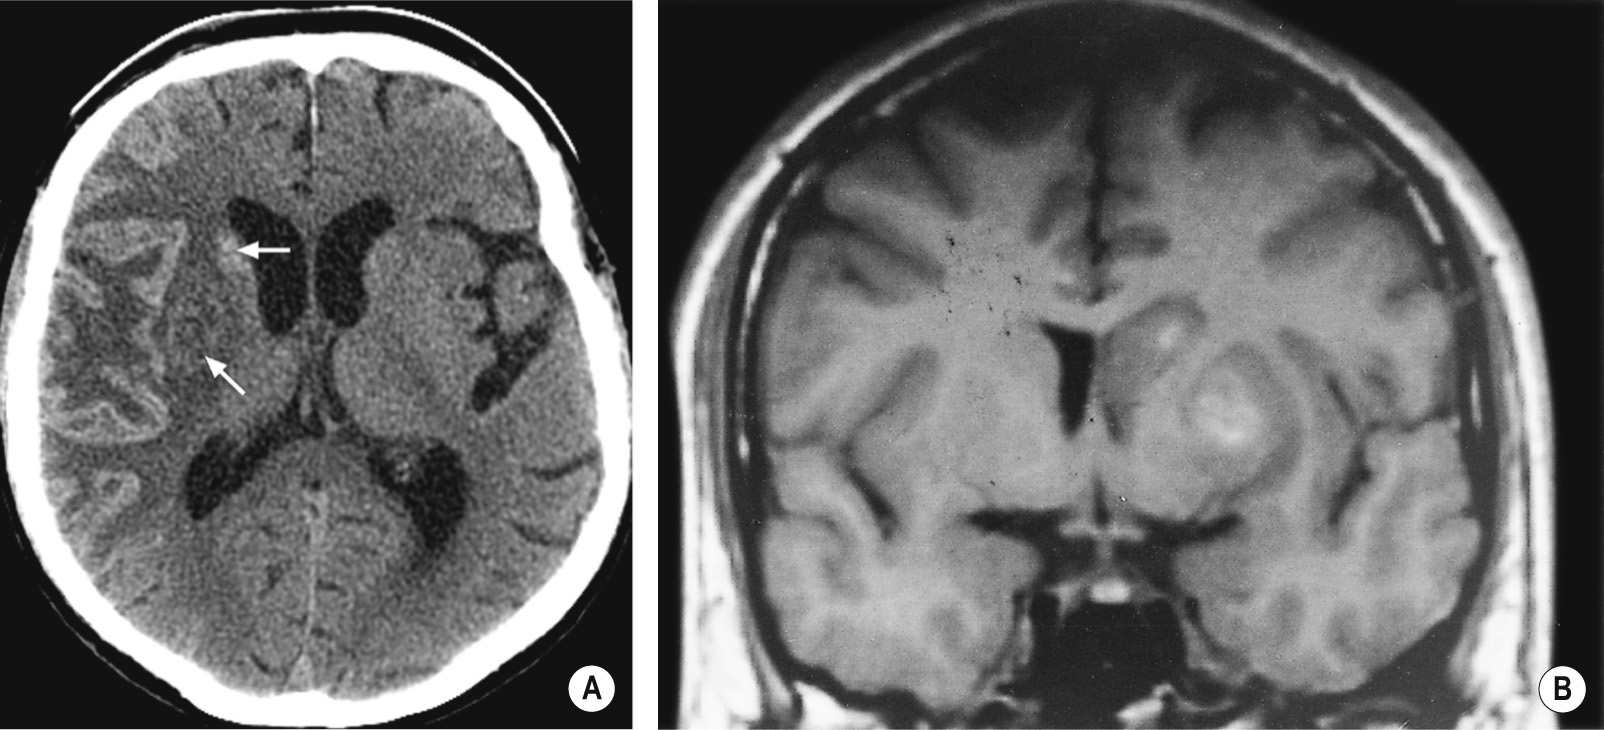 Haemorrhagic transformation. (A) NECT 2 weeks after a large right MCA territory infarct shows a gyriform pattern of haemorrhagic transformation in the right cerebral cortex. There is also haemorrhage in the basal ganglia (arrows). (B) Coronal T1WI shows swelling and signal alteration of the caudate and lentiform nuclei. Sparing of the cortex is due to adequate leptomeningeal collateral circulation. The central T1–high SI area within the infarct indicates haemorrhagic transformation. *